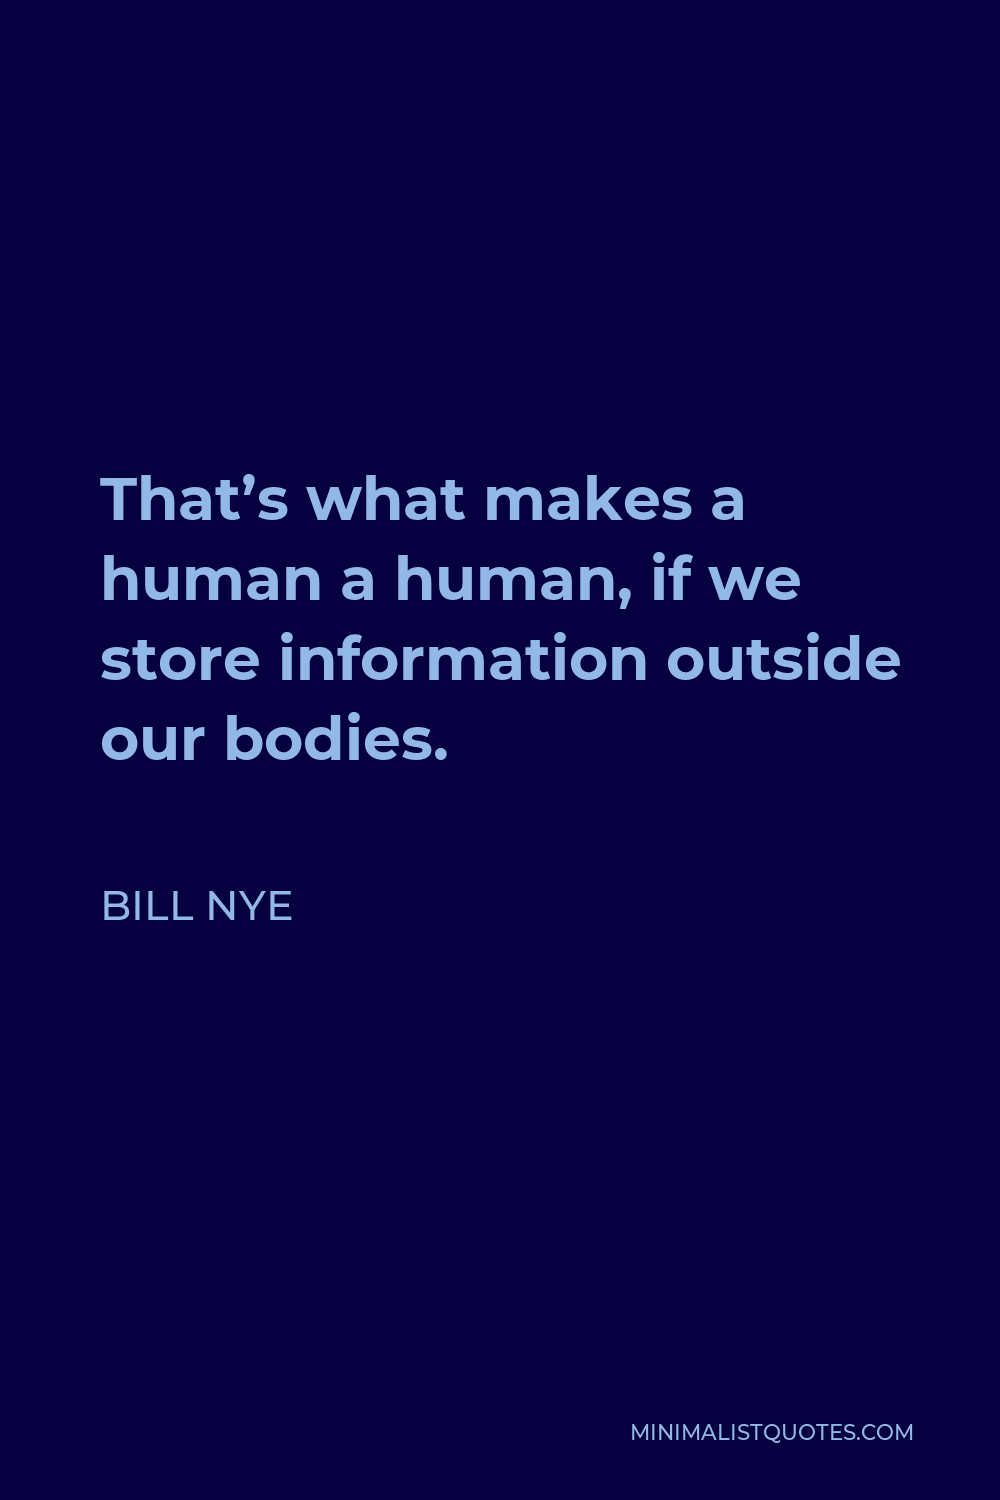 Bill Nye Quote - That’s what makes a human a human, if we store information outside our bodies.